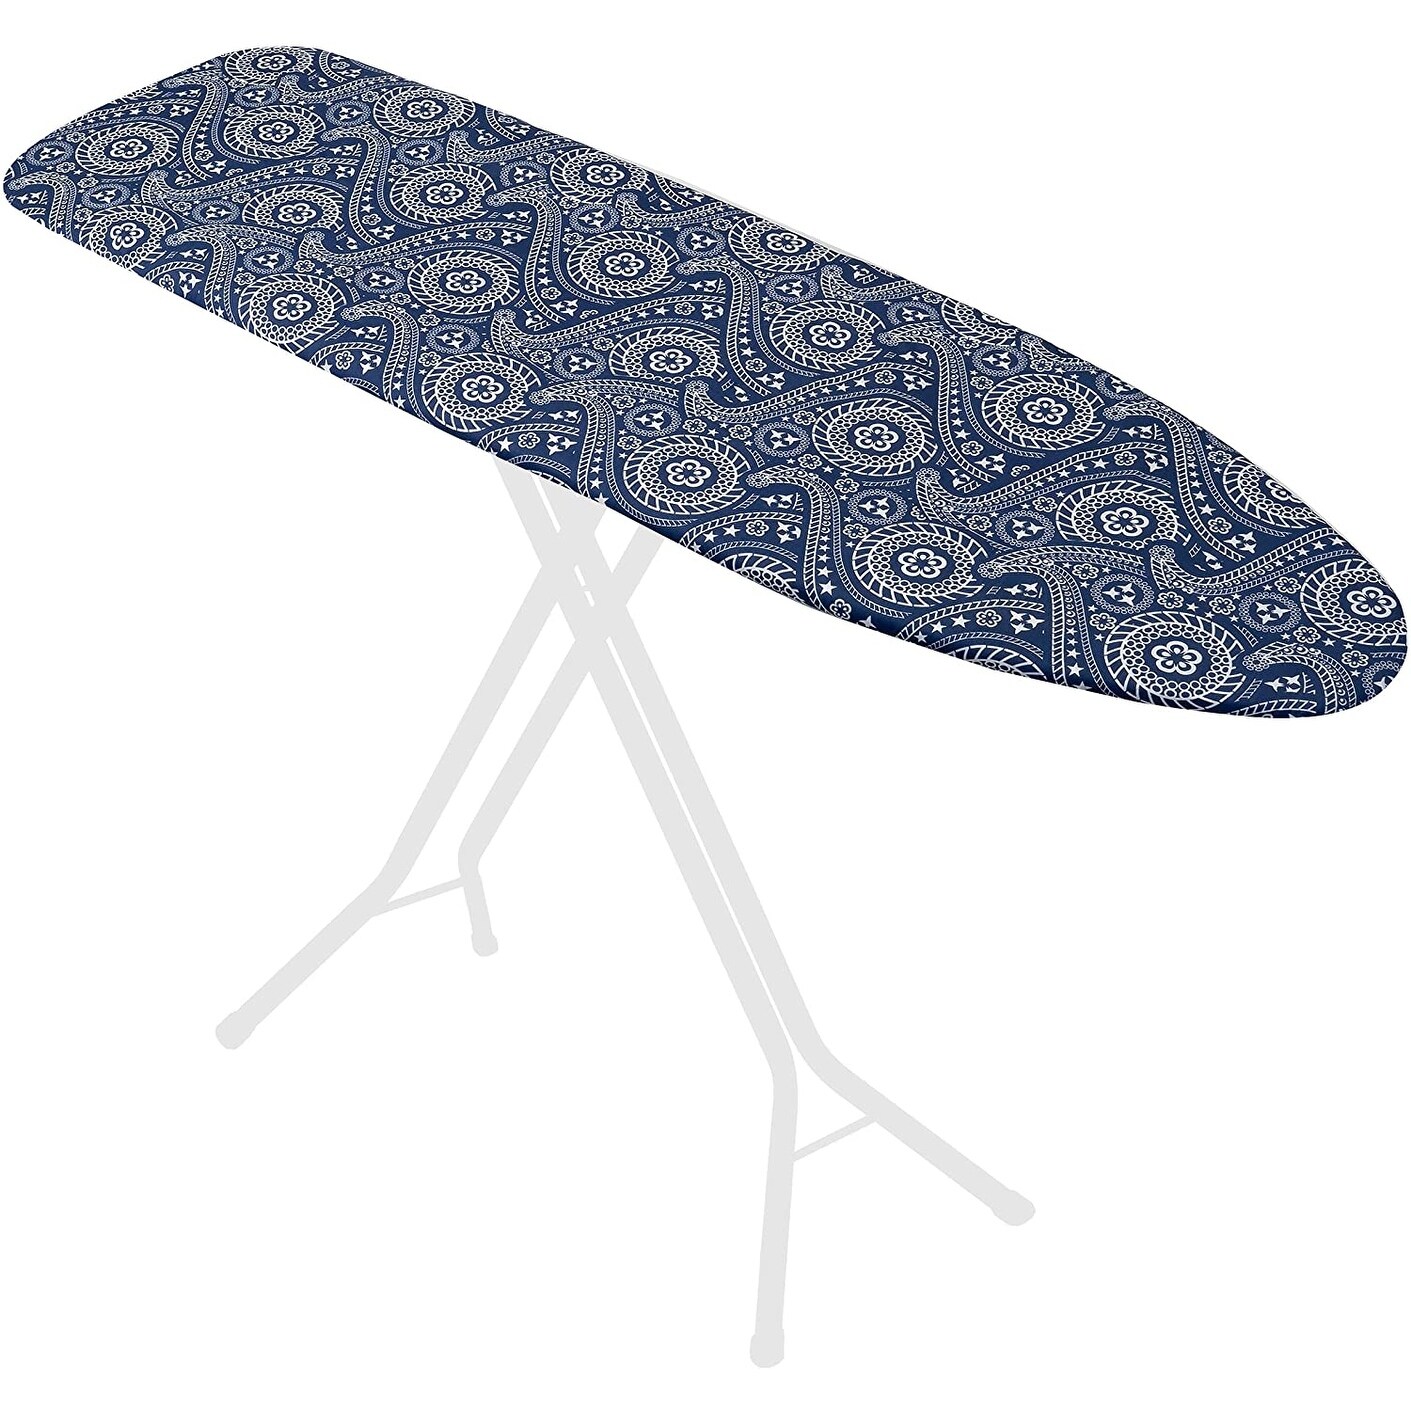 Mini Ironing Board | Portable Tabletop Ironing Board With Folding L